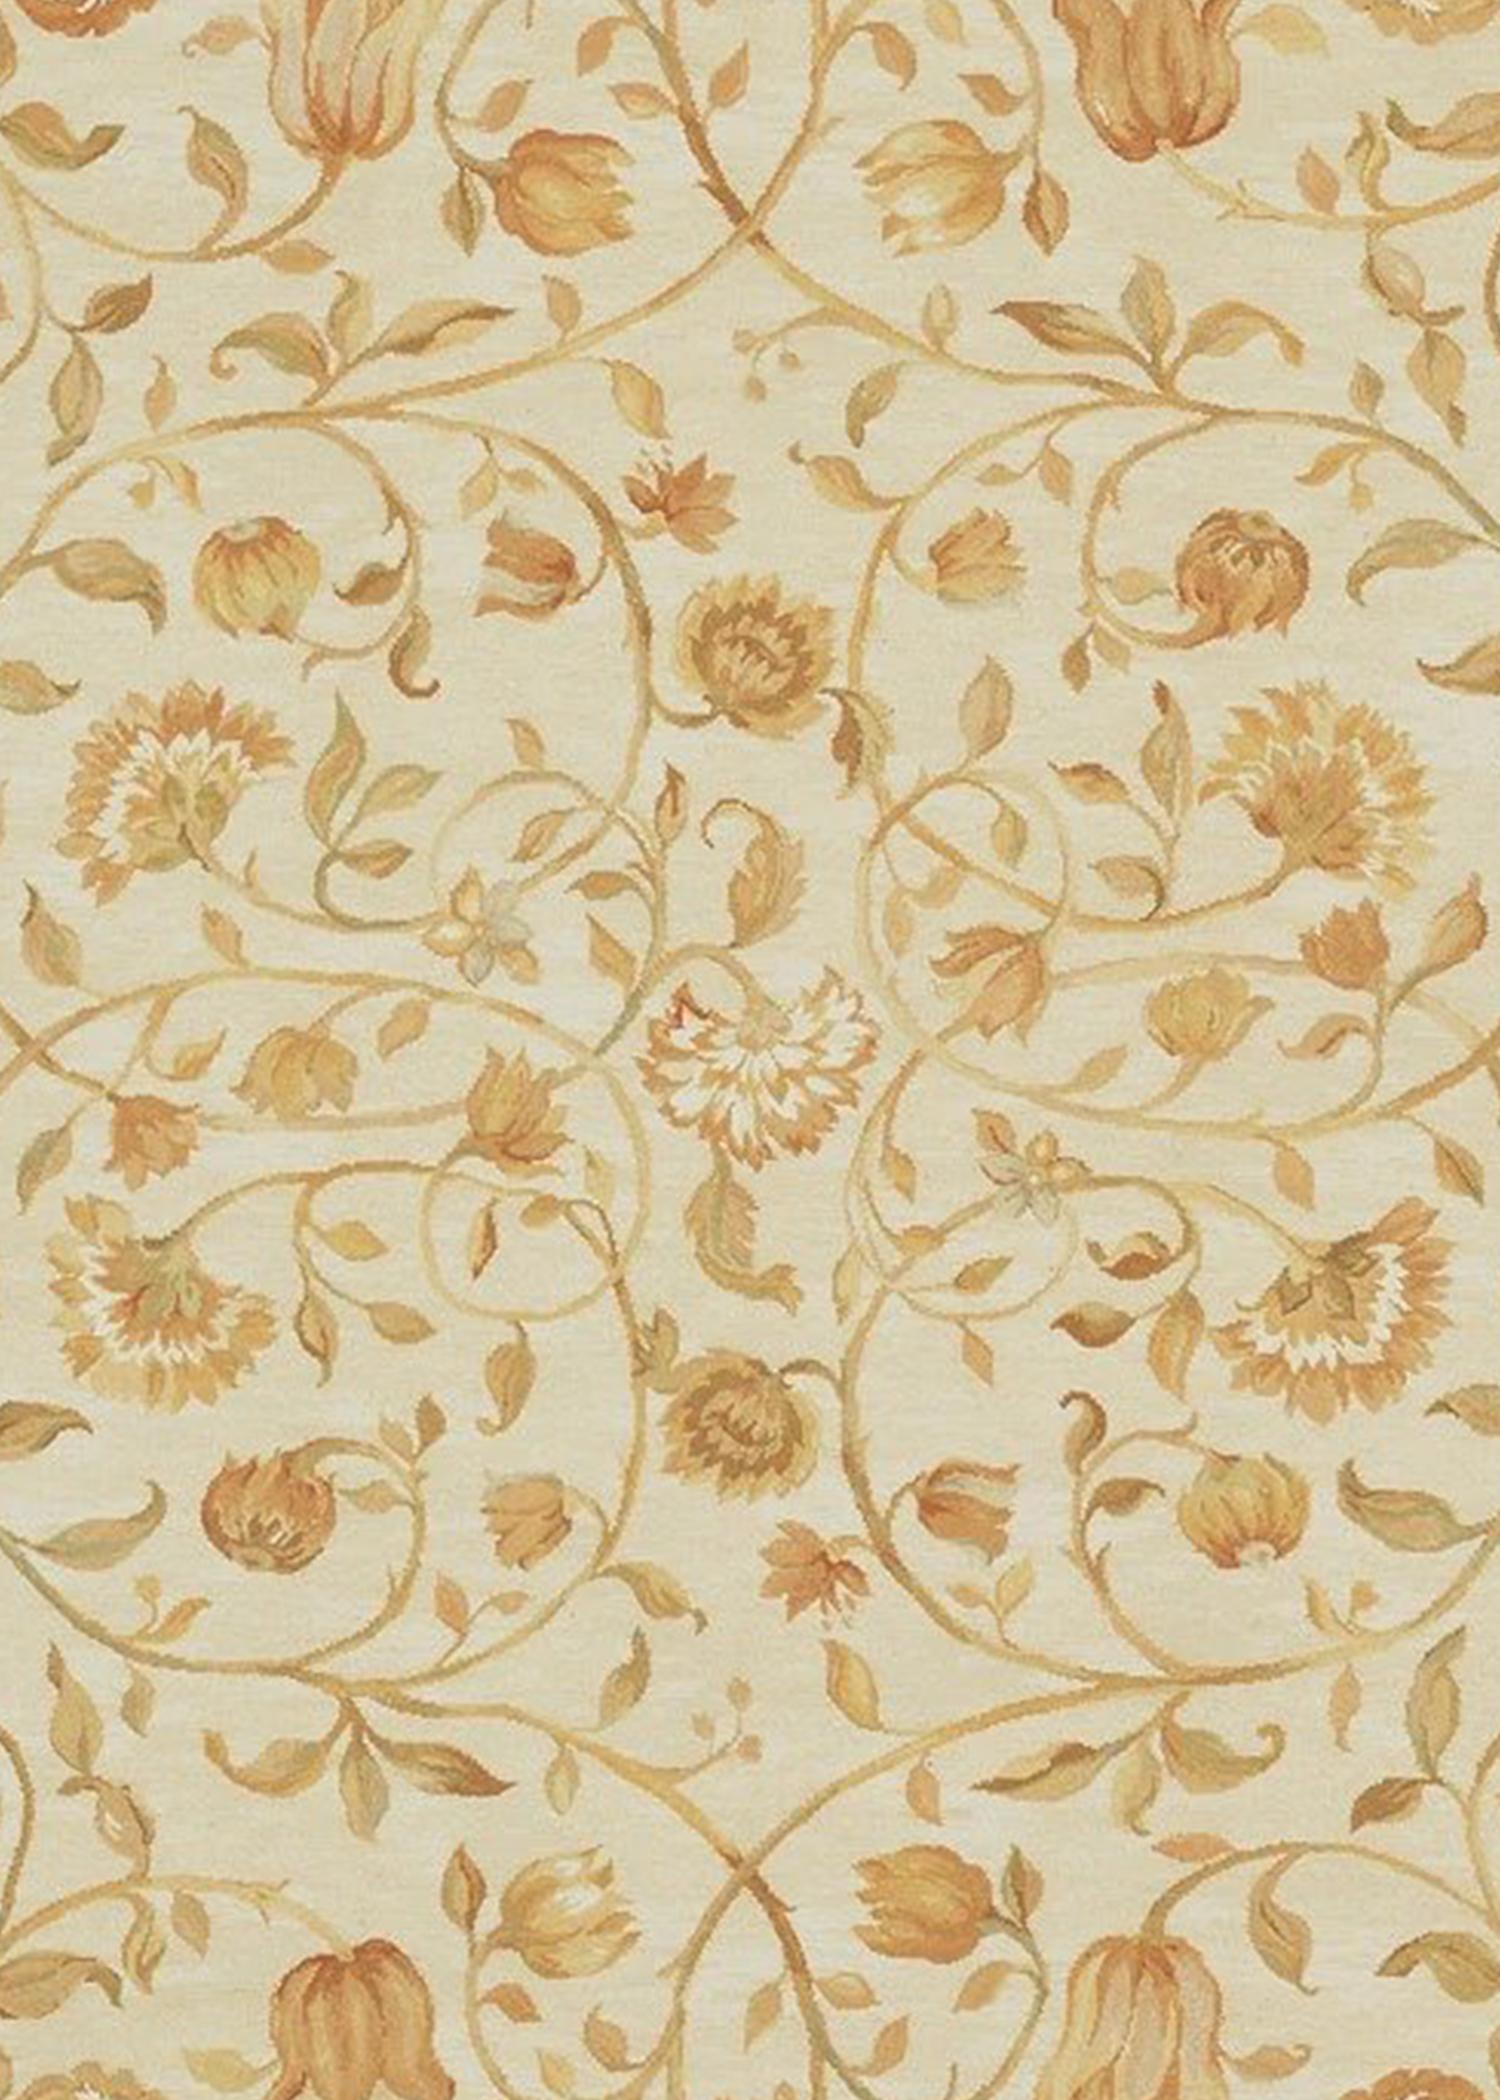 Based on an original Asmara painting inspired by a Tuscan Hillside covered with olive groves, cypresses, wildflowers and goldenrod bushes. This handmade cut and loop pile rug was made by combining a loop weave invented by Asmara with the ancient